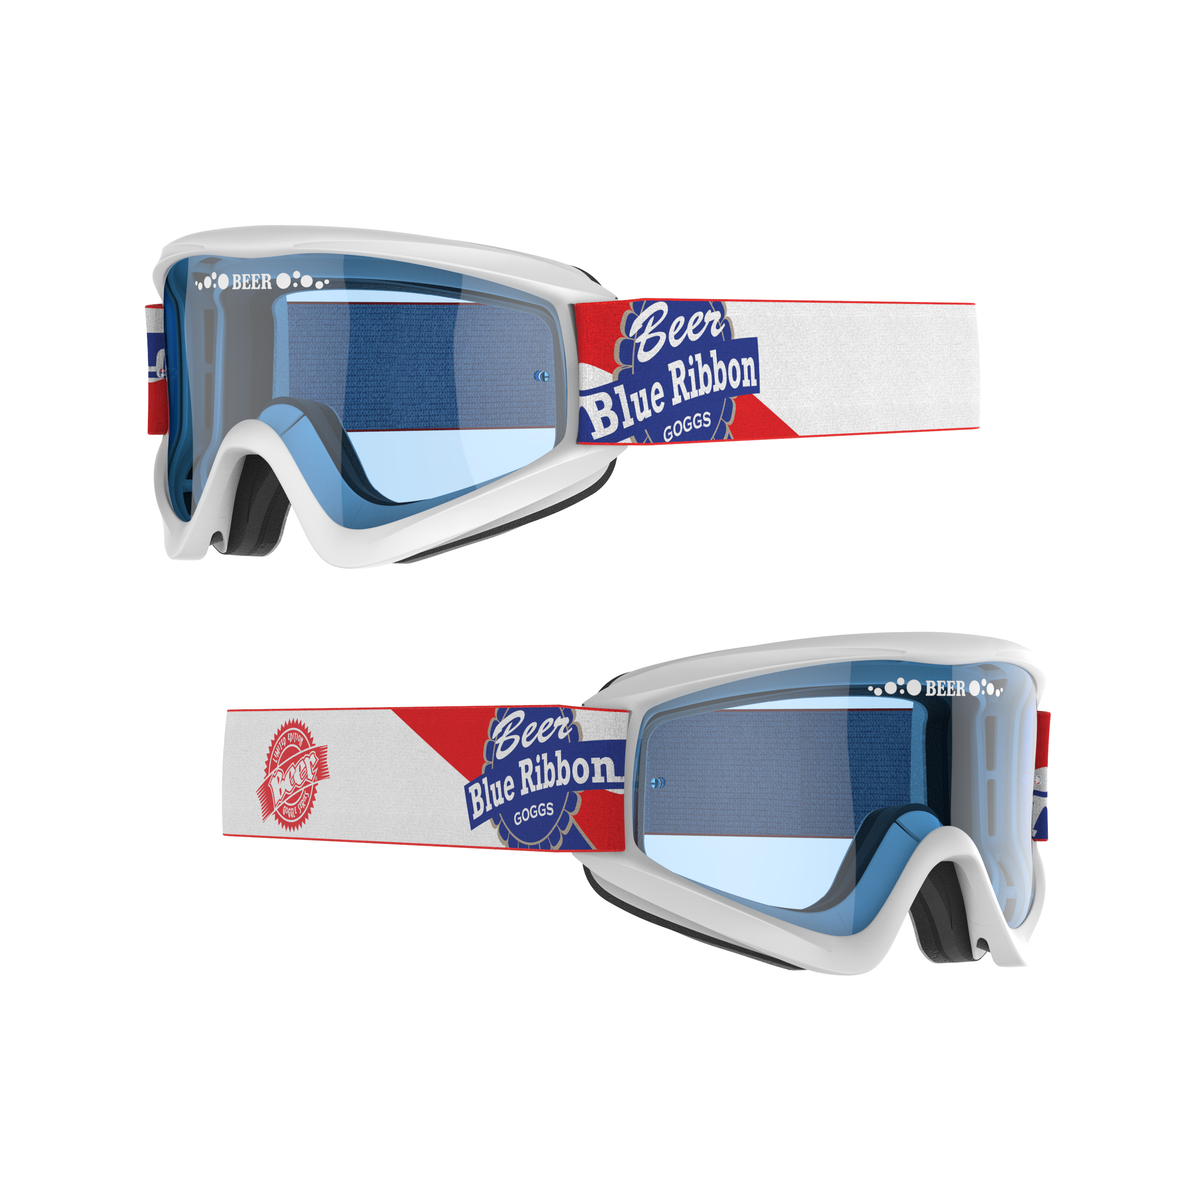 Beer Goggles Dry BEER Limited Edition &quot;PBR&quot;